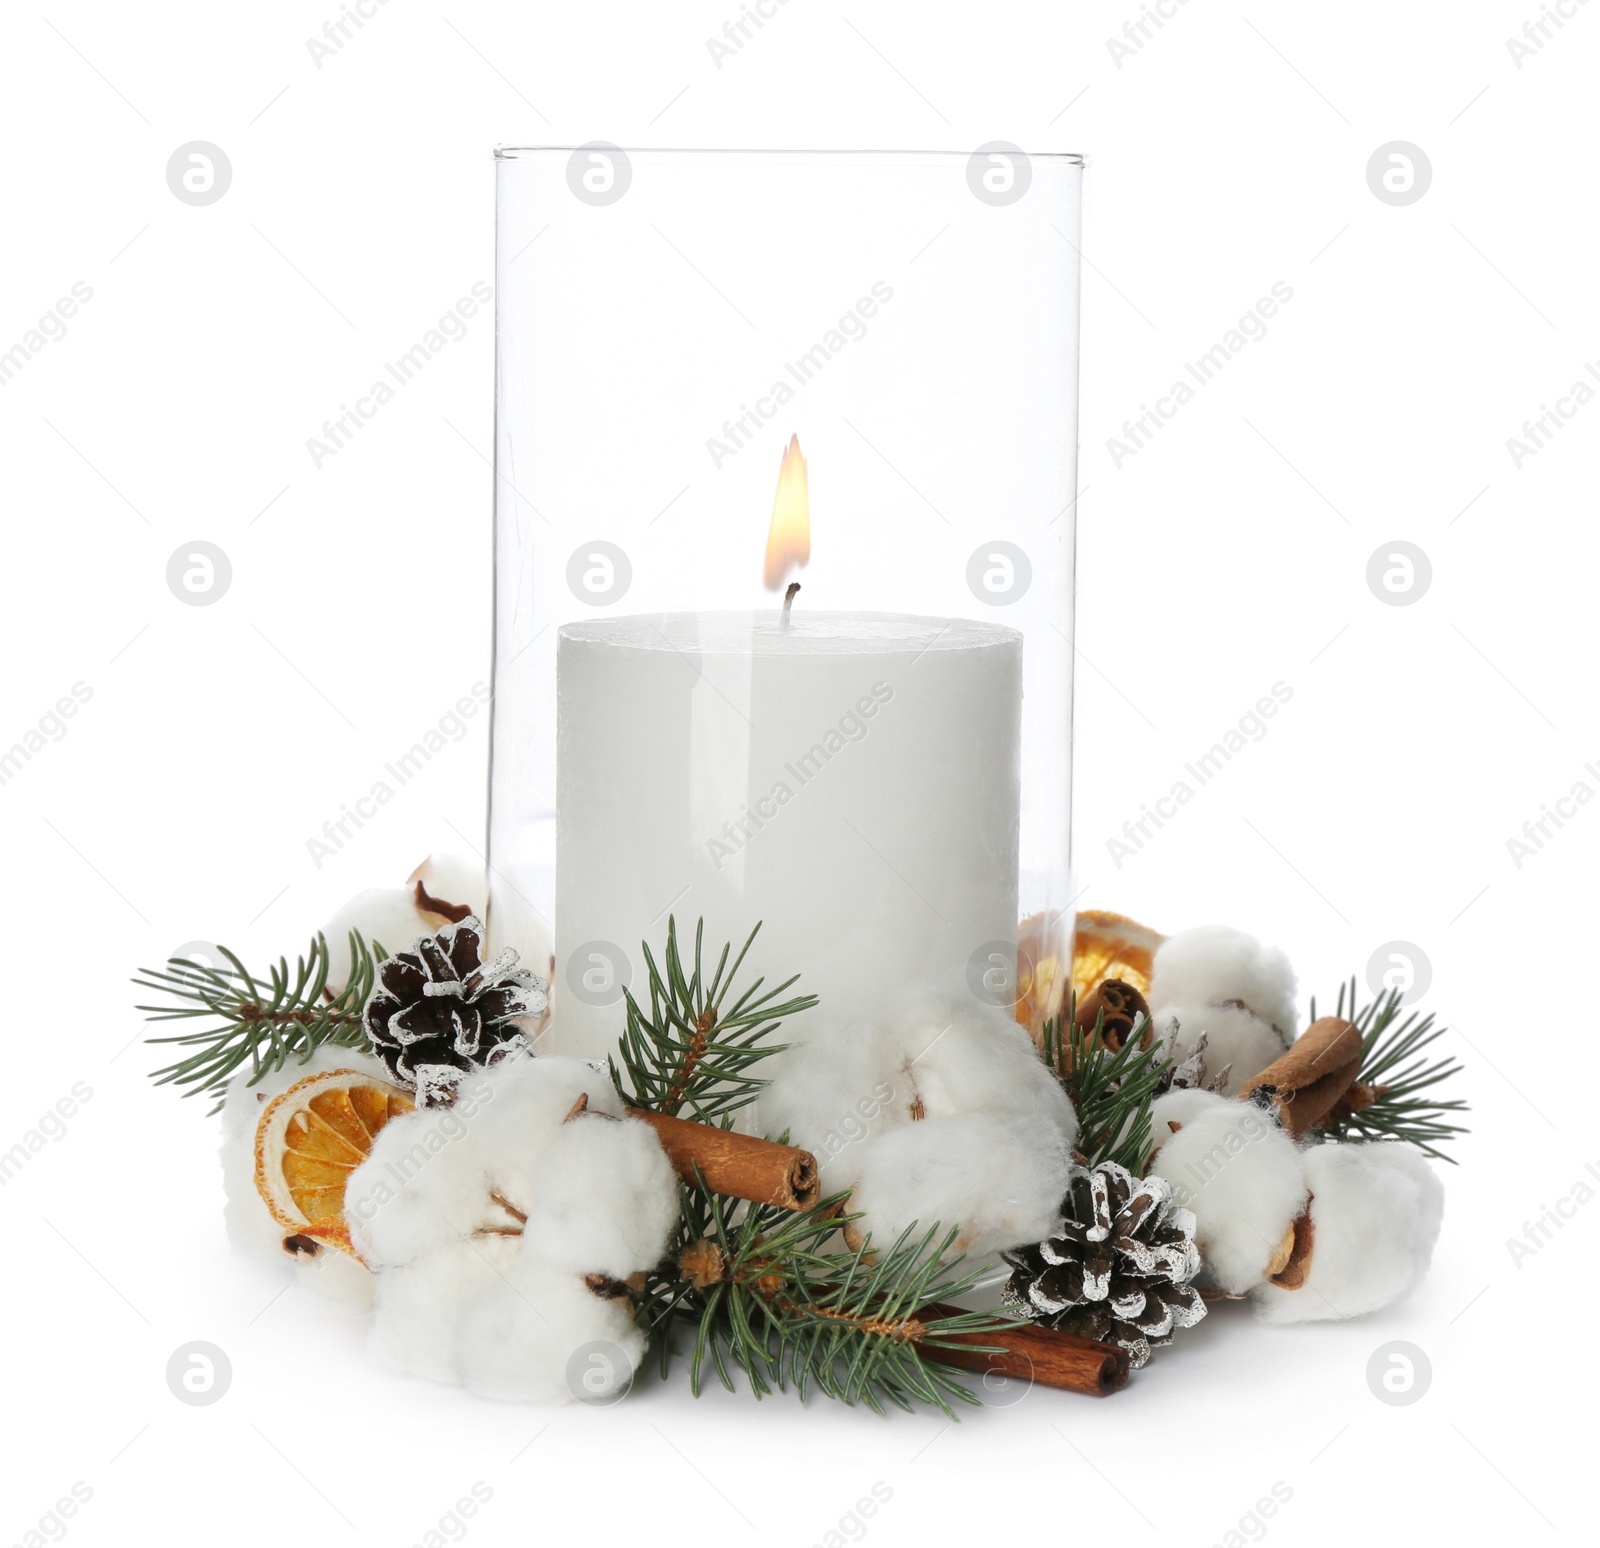 Photo of Glass holder with burning candle and Christmas decor isolated on white